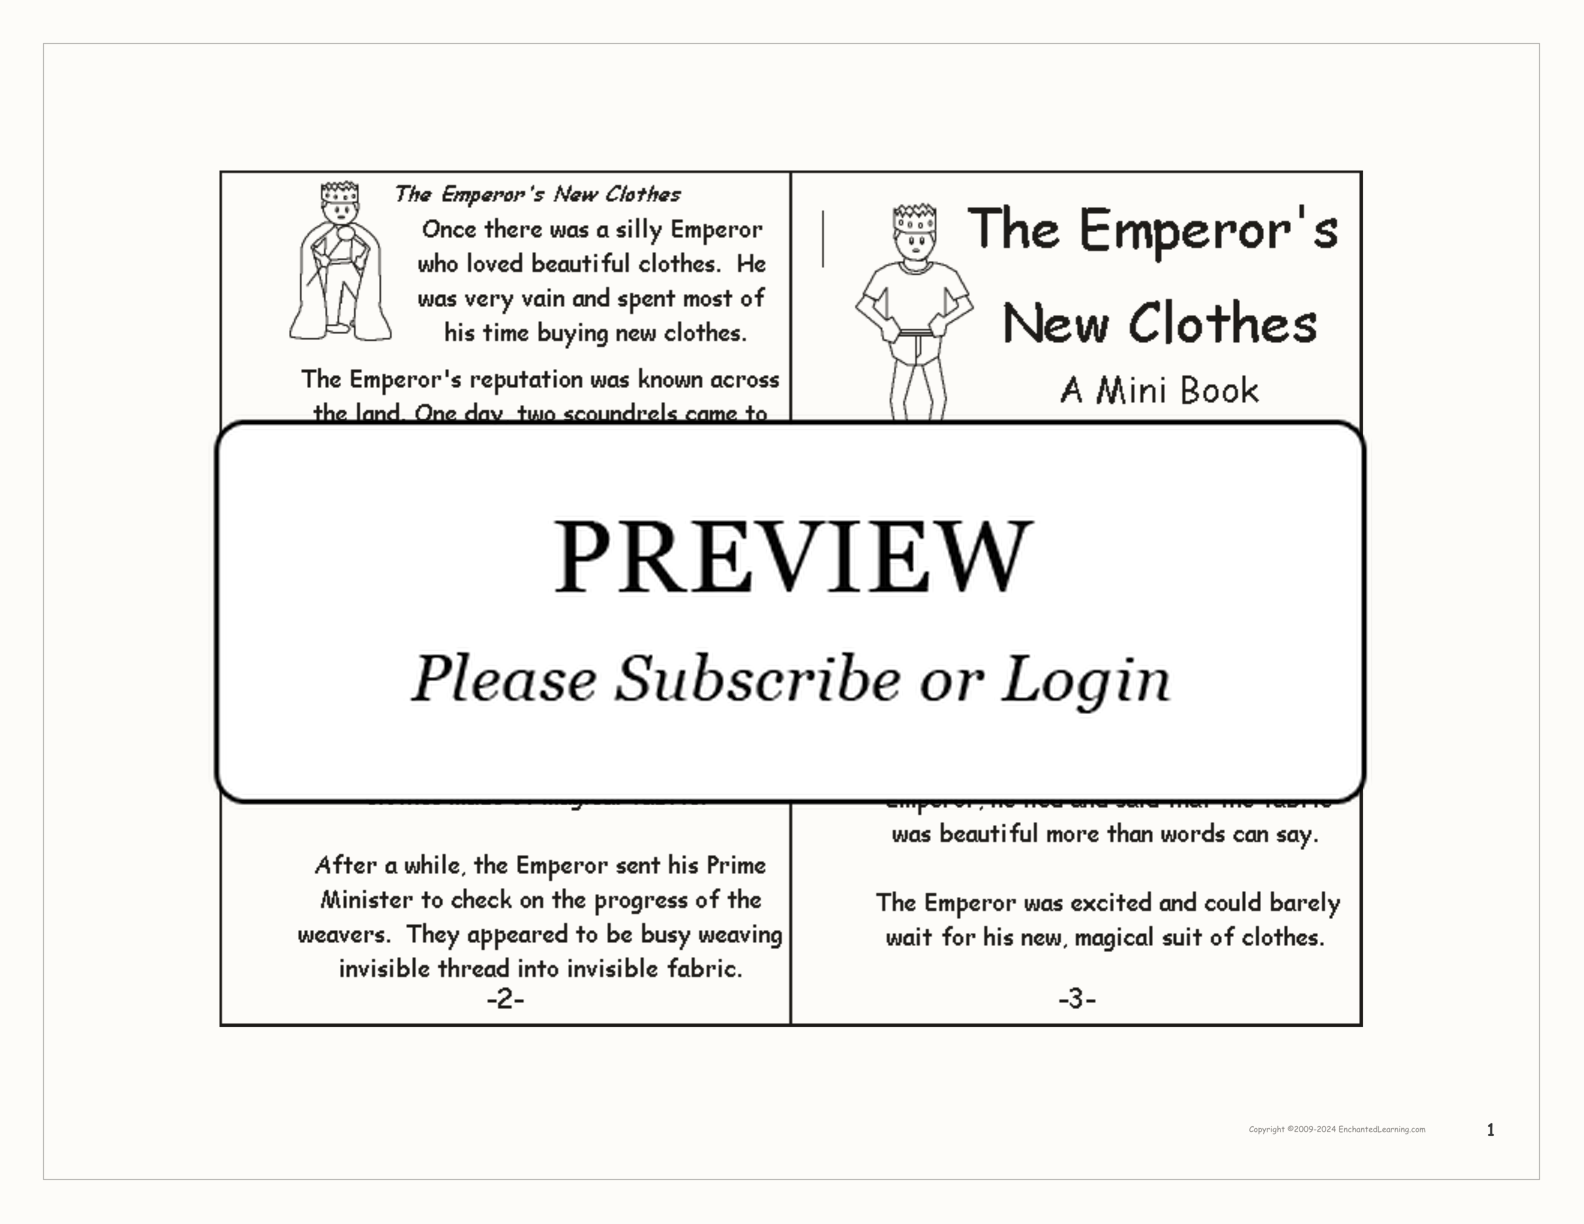 'The Emperor's New Clothes' Book interactive printout page 1